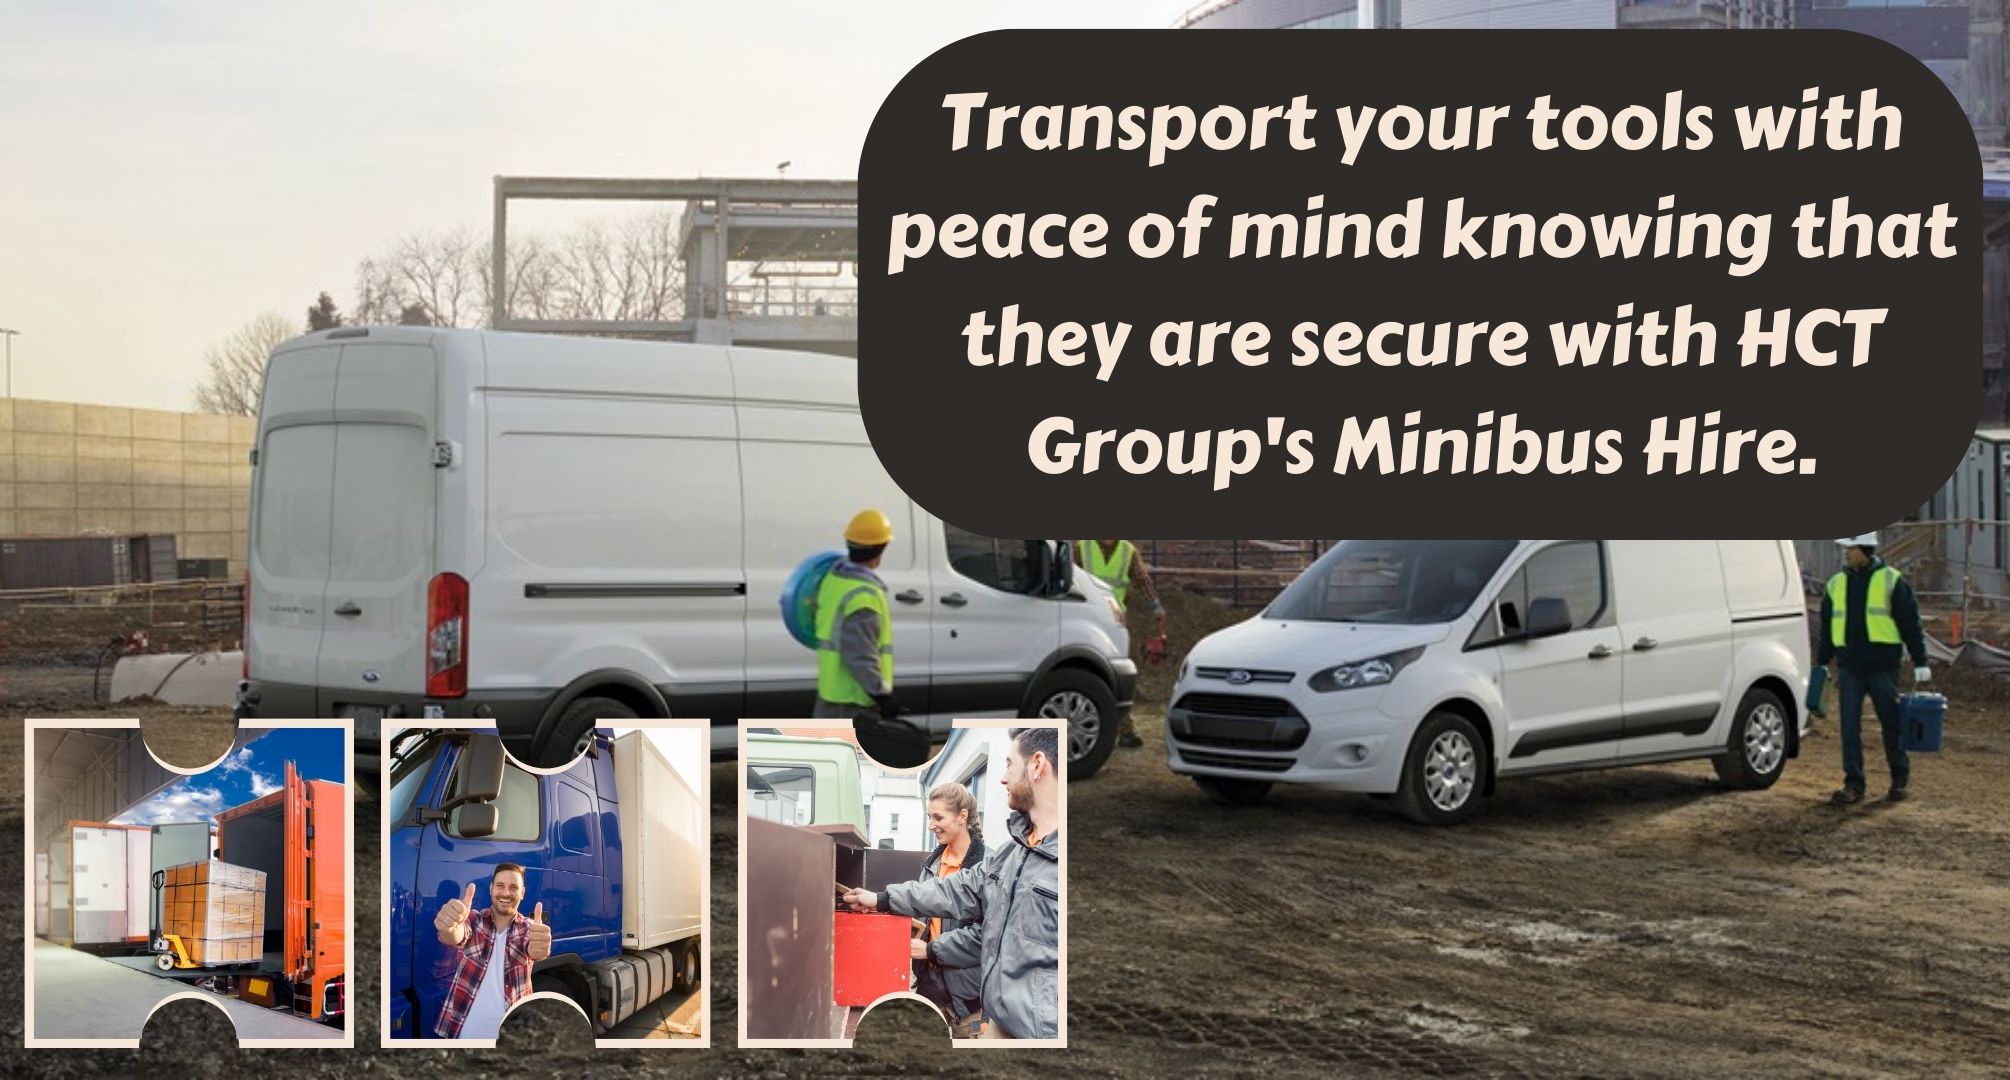 HCT Group's Minibus Hire The Convenient Way to Transport Your Home Improvement Tools 